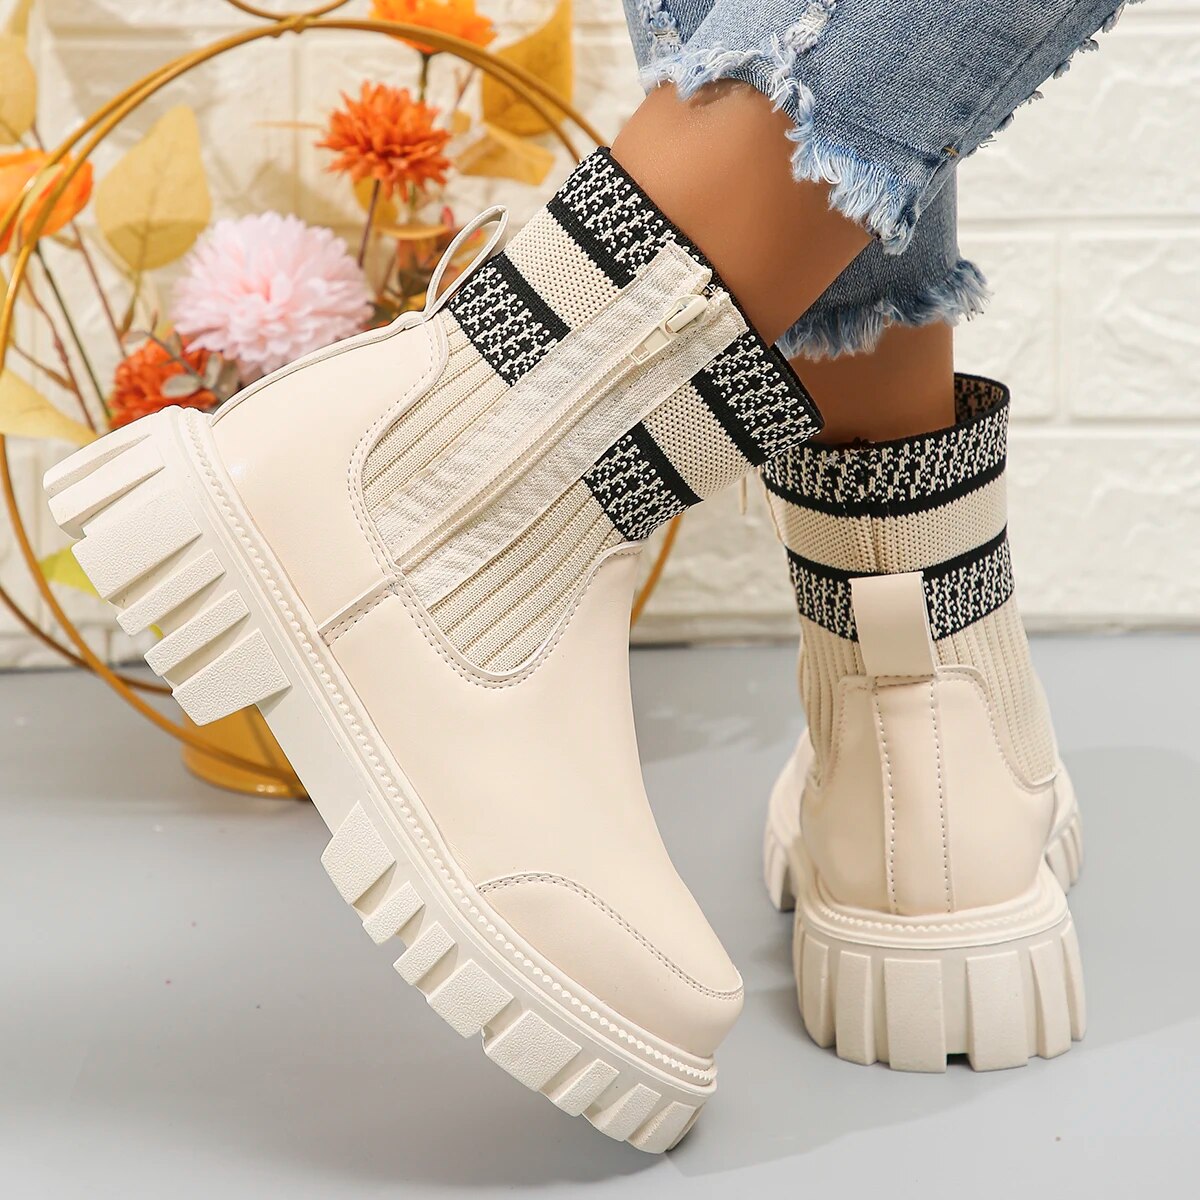 Gominglo - New Women's Fashion Chunky Striped Knitted Autumn Winter Ankle Boots GOMINGLO